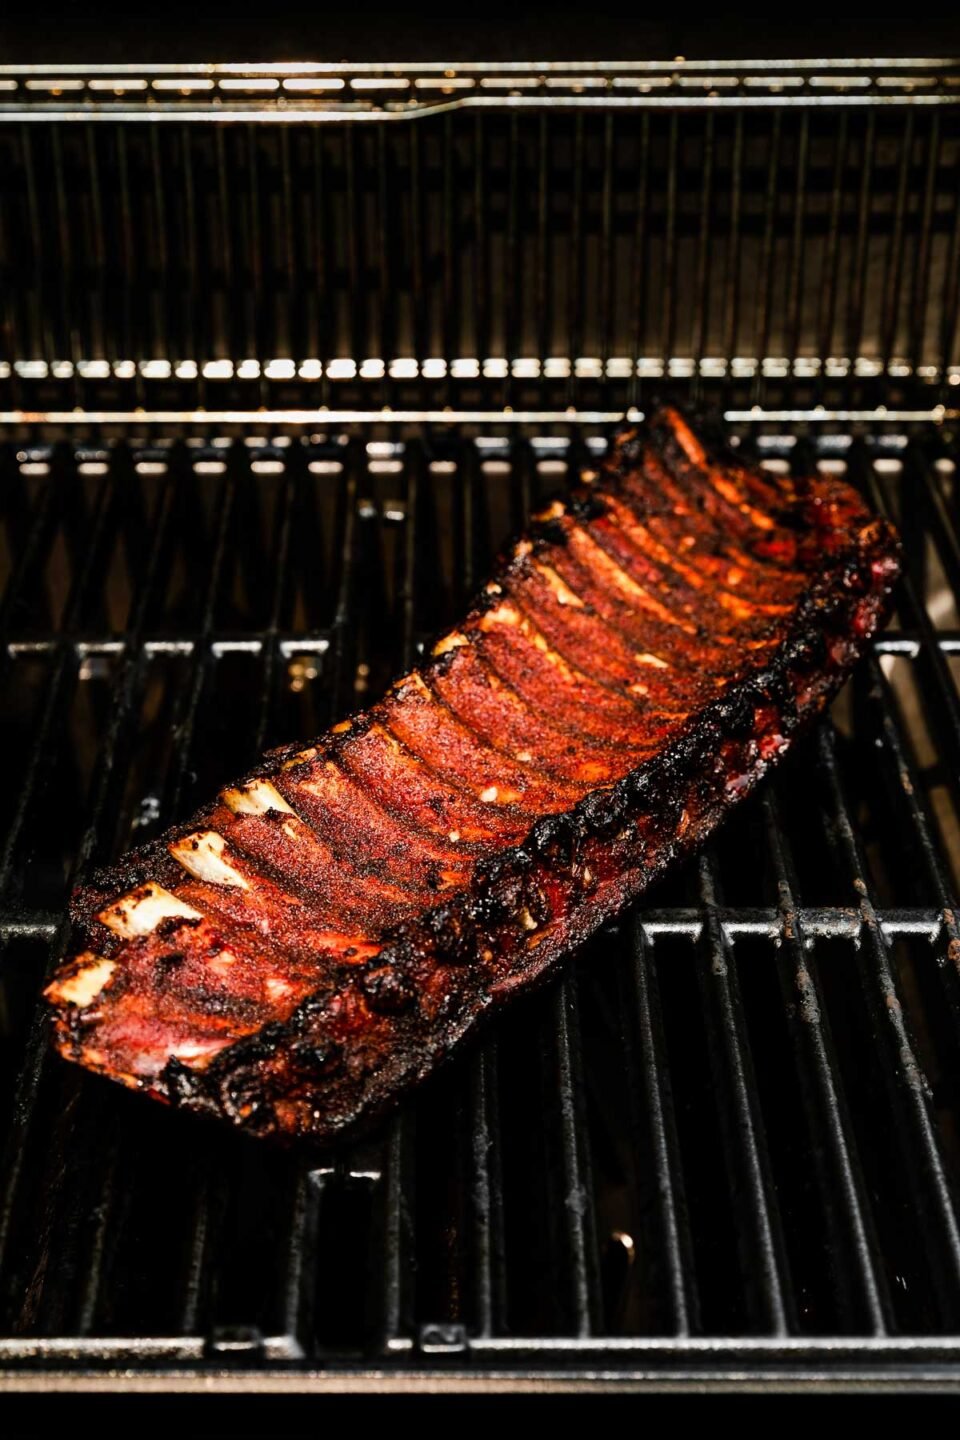 A close-up shot of the grill with a rack of cooked baby back ribs.